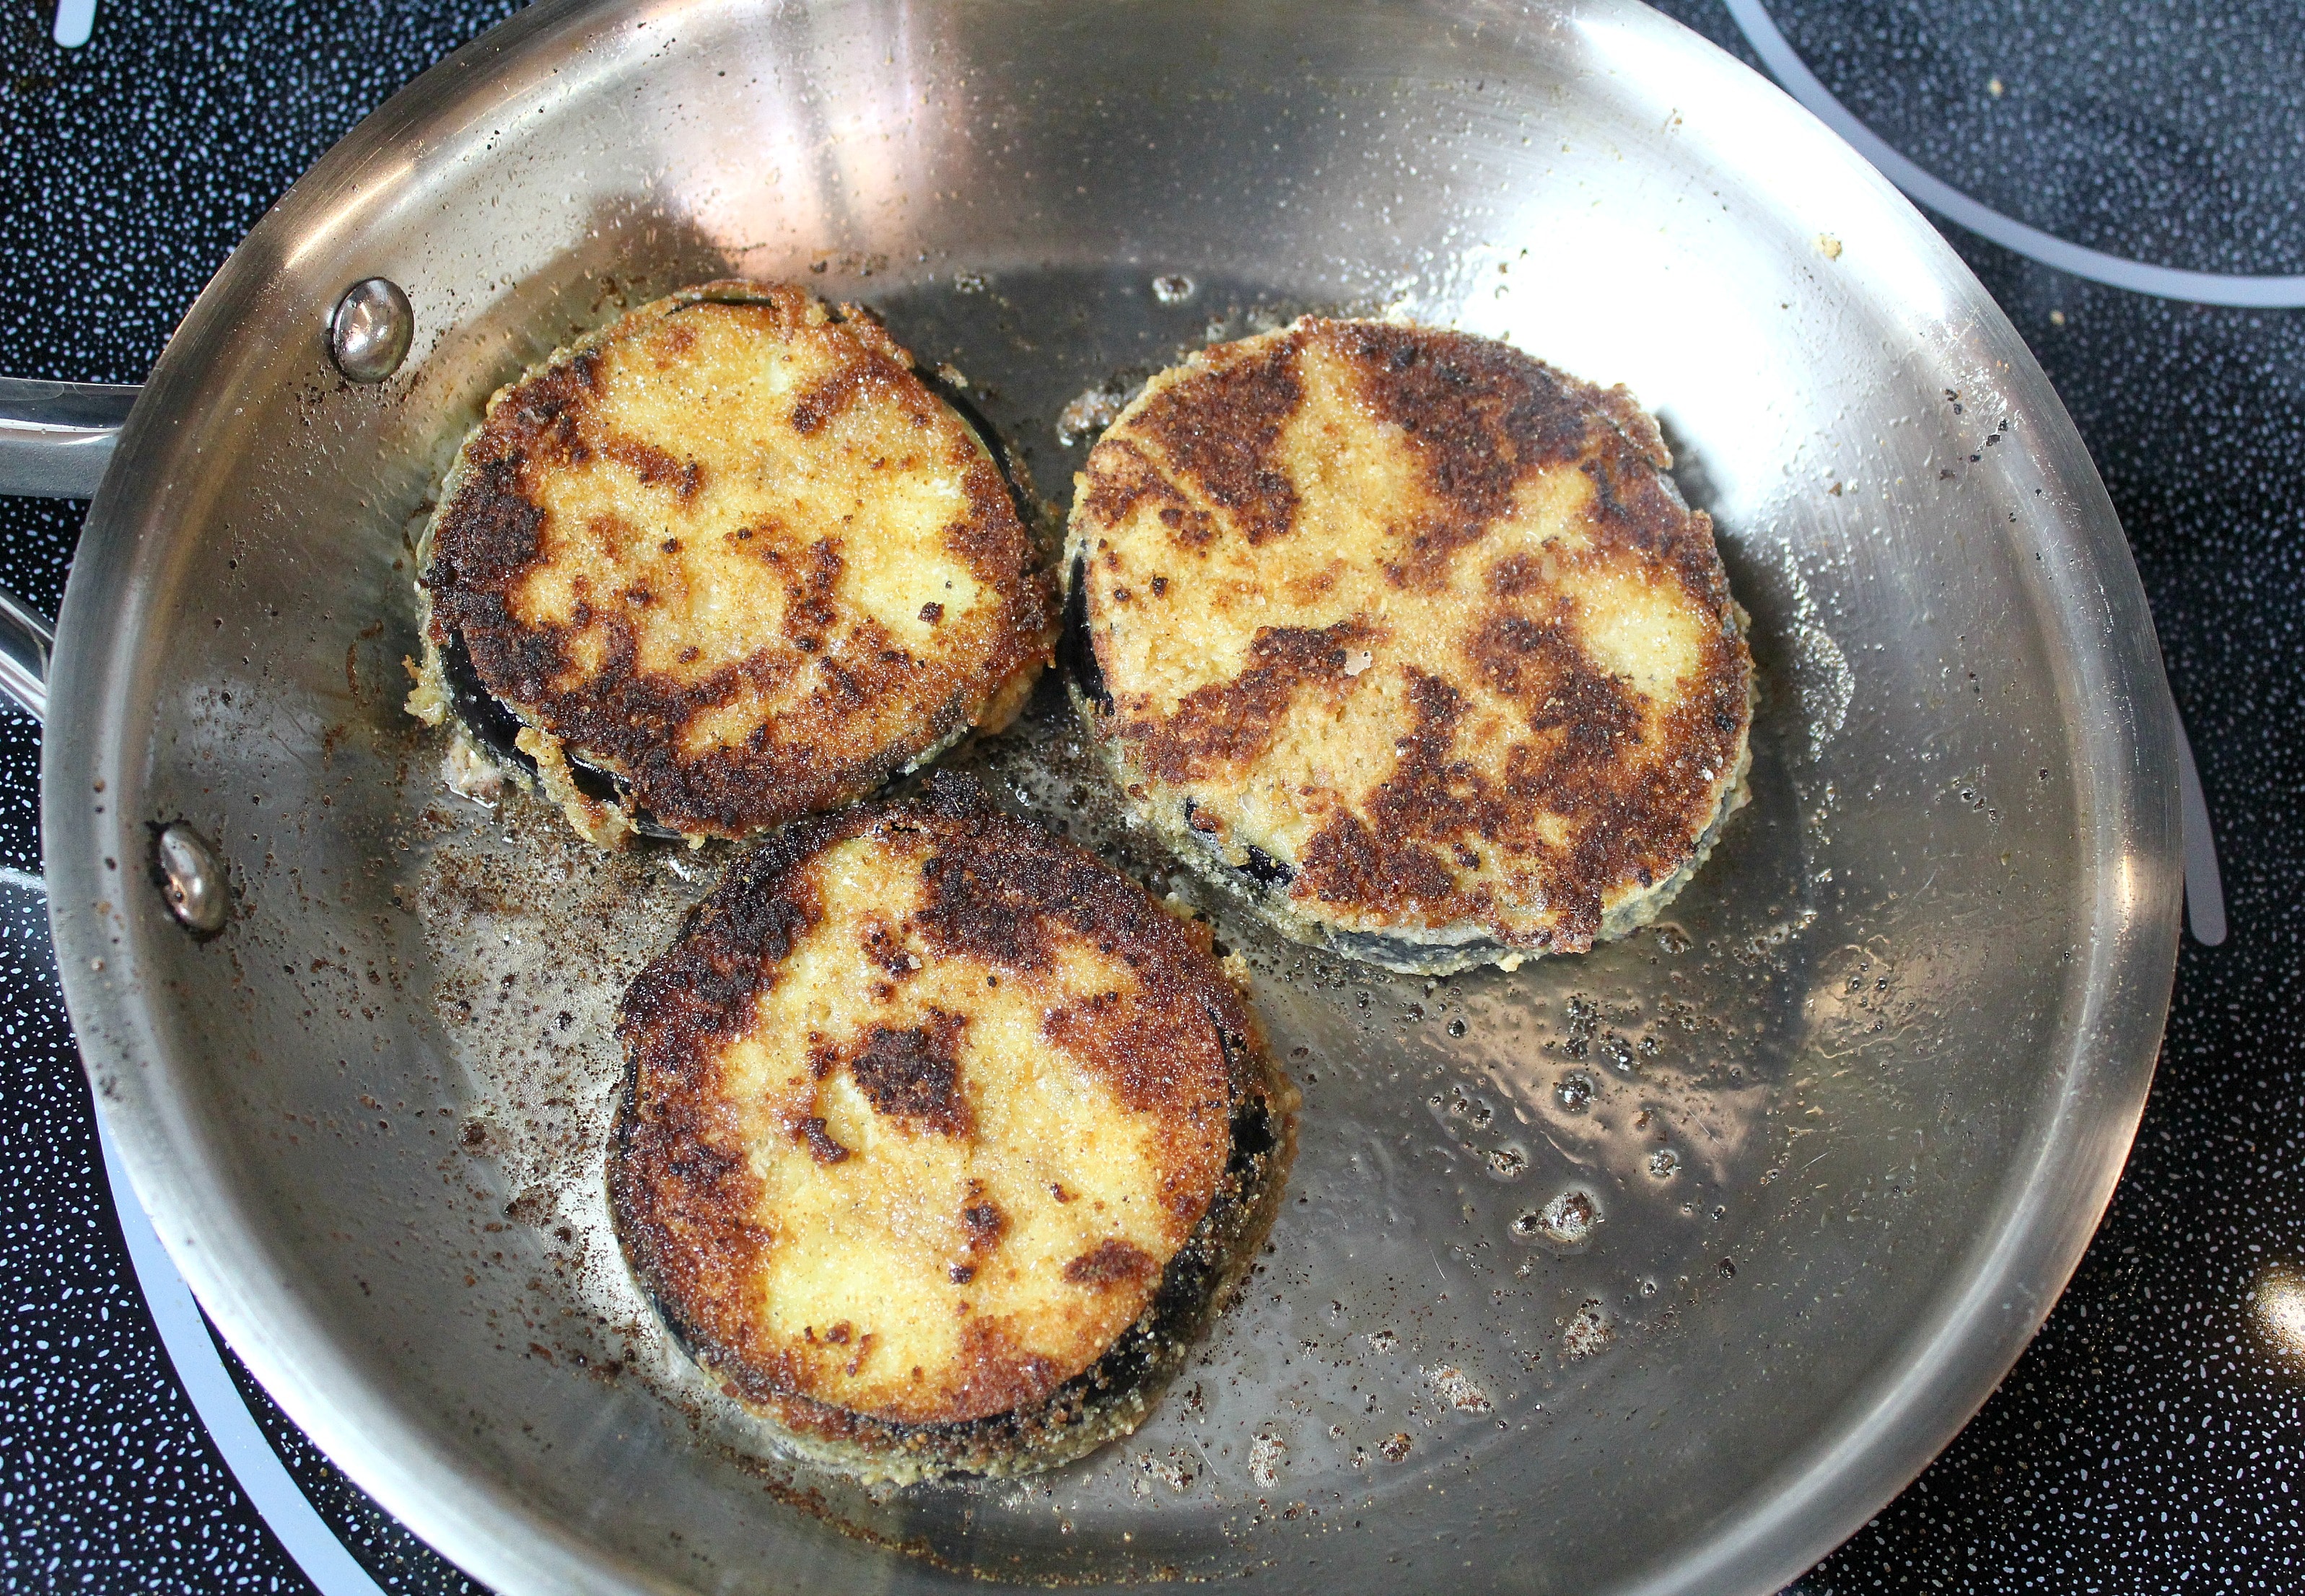 Place eggplant slices coated in breadcrumbs in oil and fry until golden brown, 